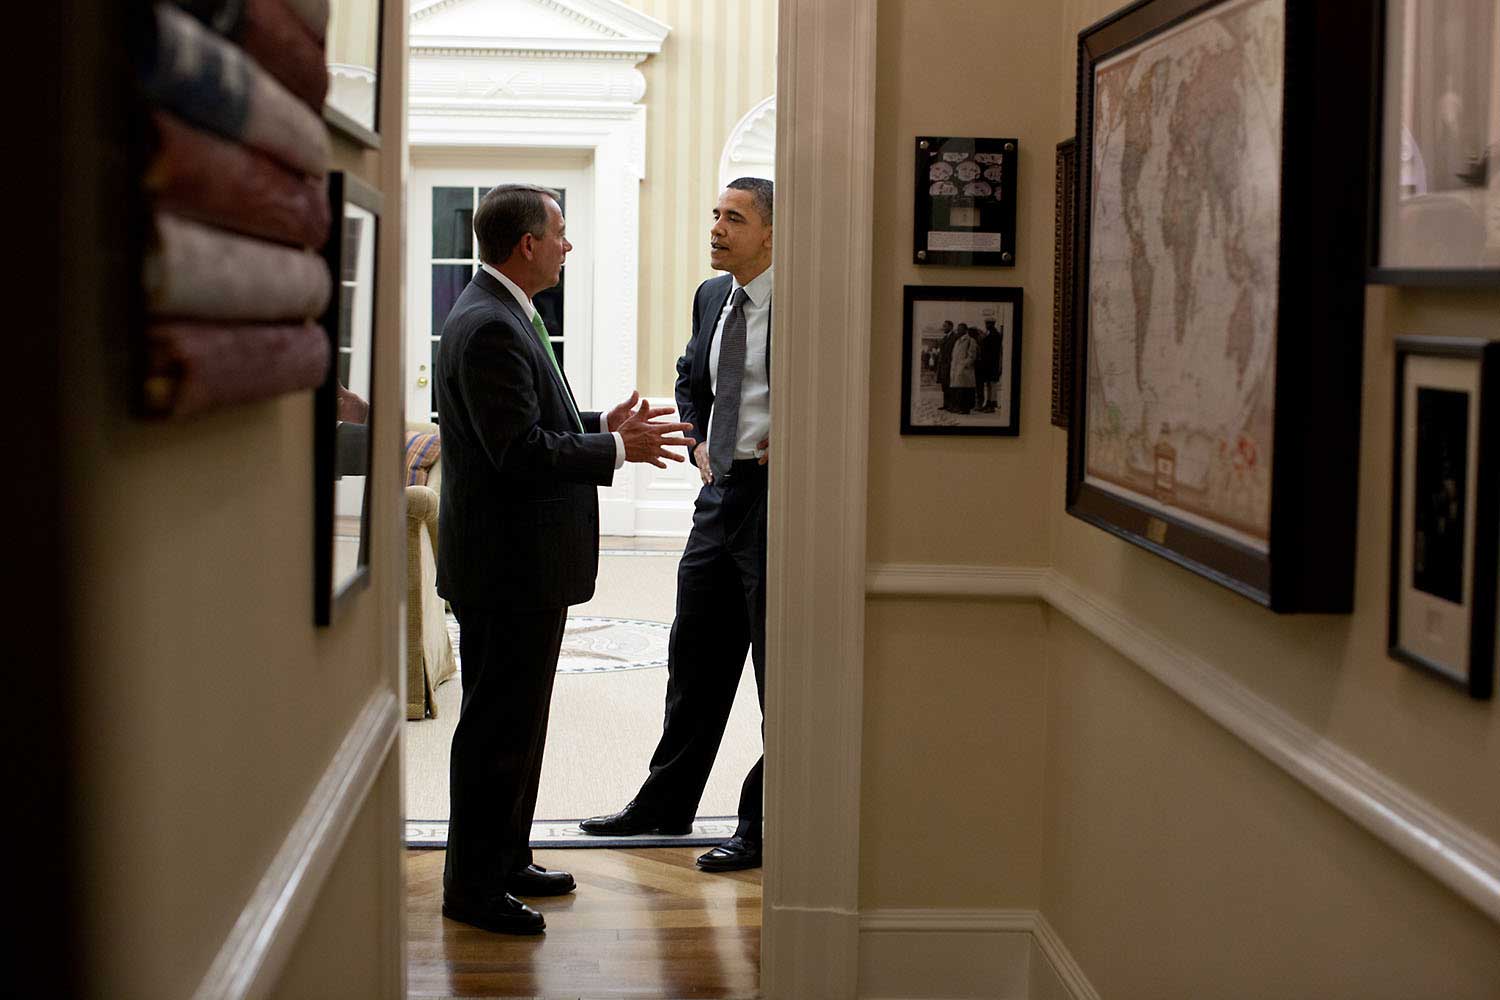 President Obama and House Speaker John Boehner talk in the Oval Office following a late night meeting on the budget, April 6, 2011.